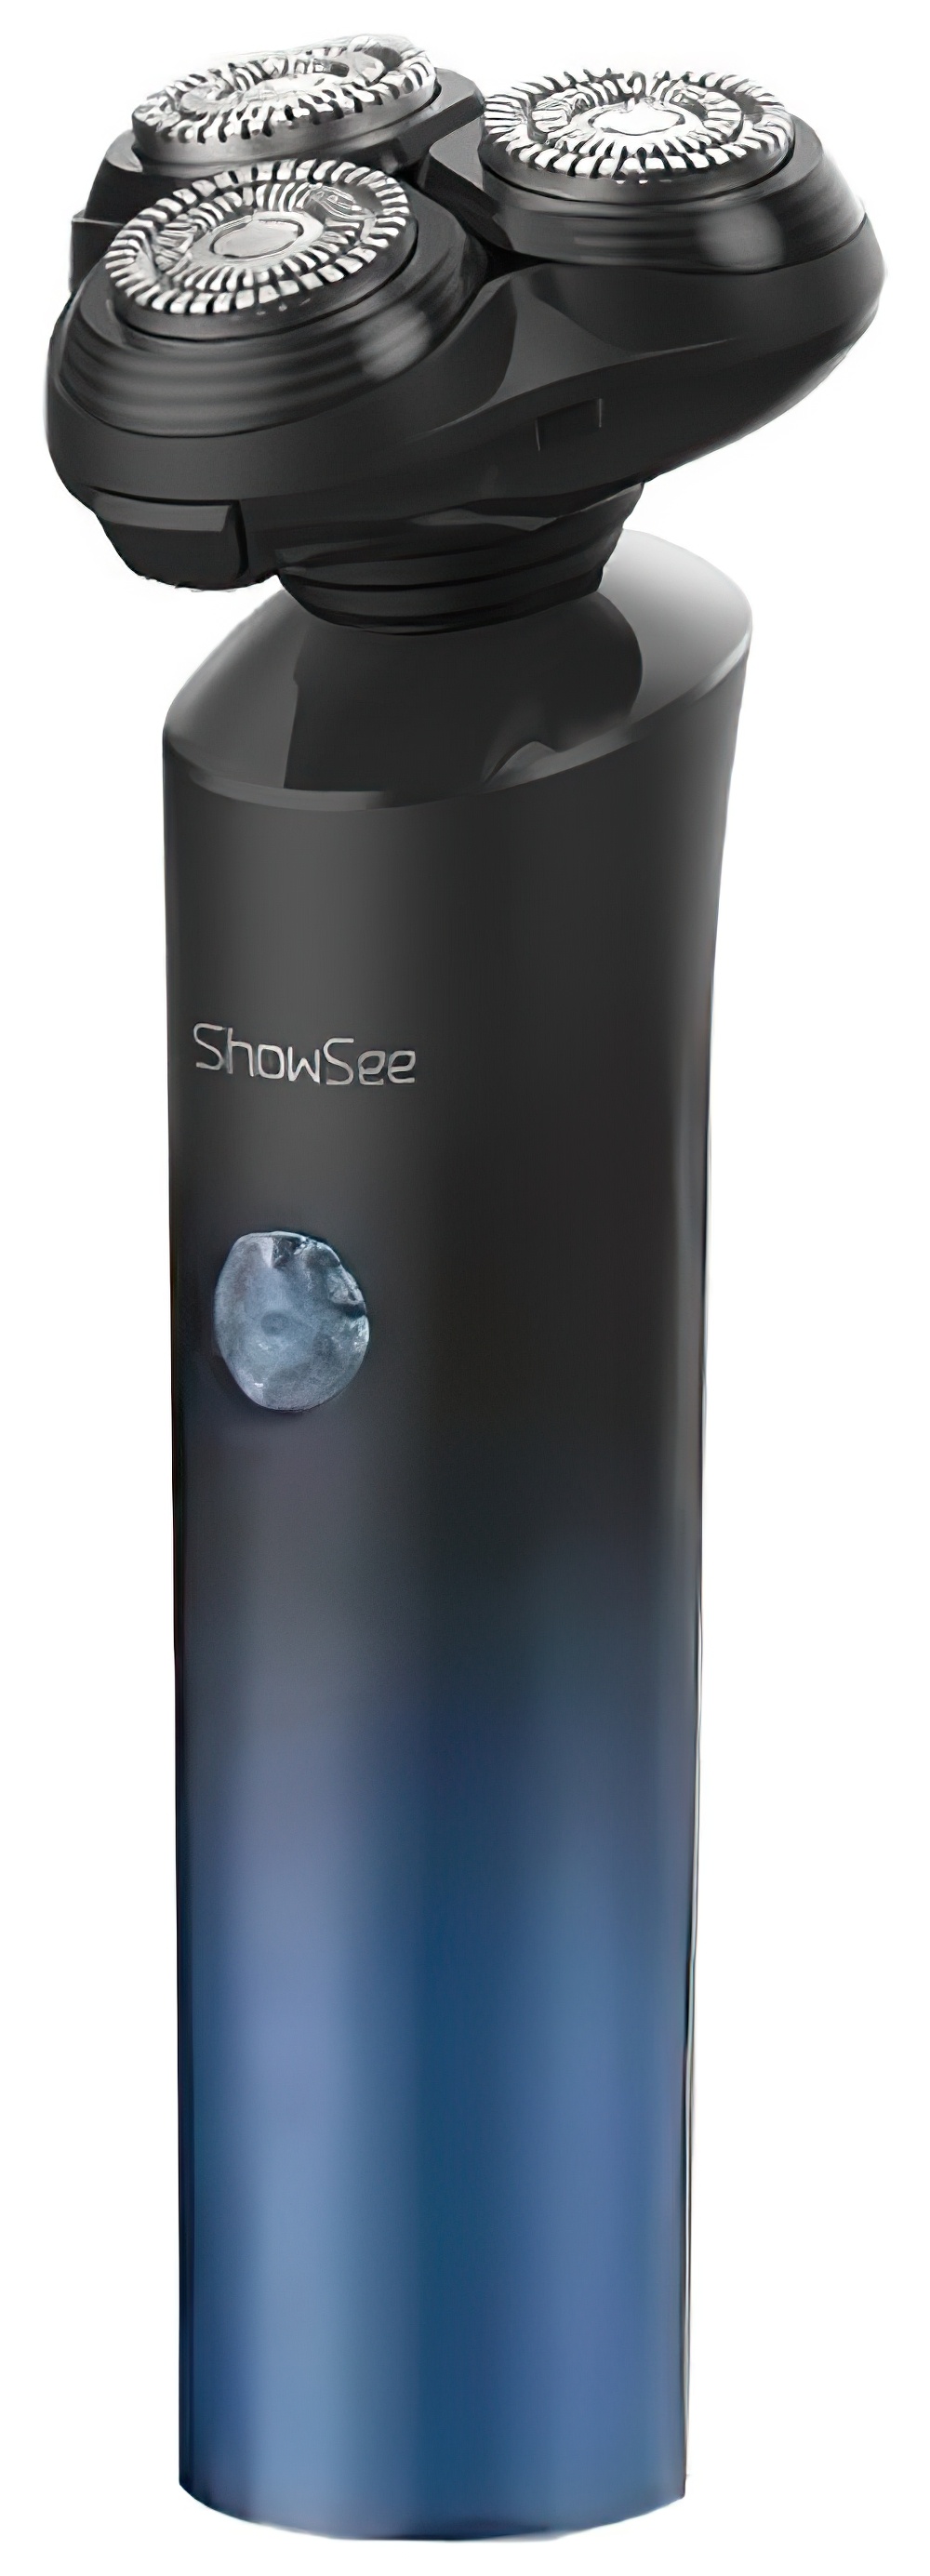 Xiaomi Showsee Electric Shaver F1 Blue (F1-B) КАРКАМ